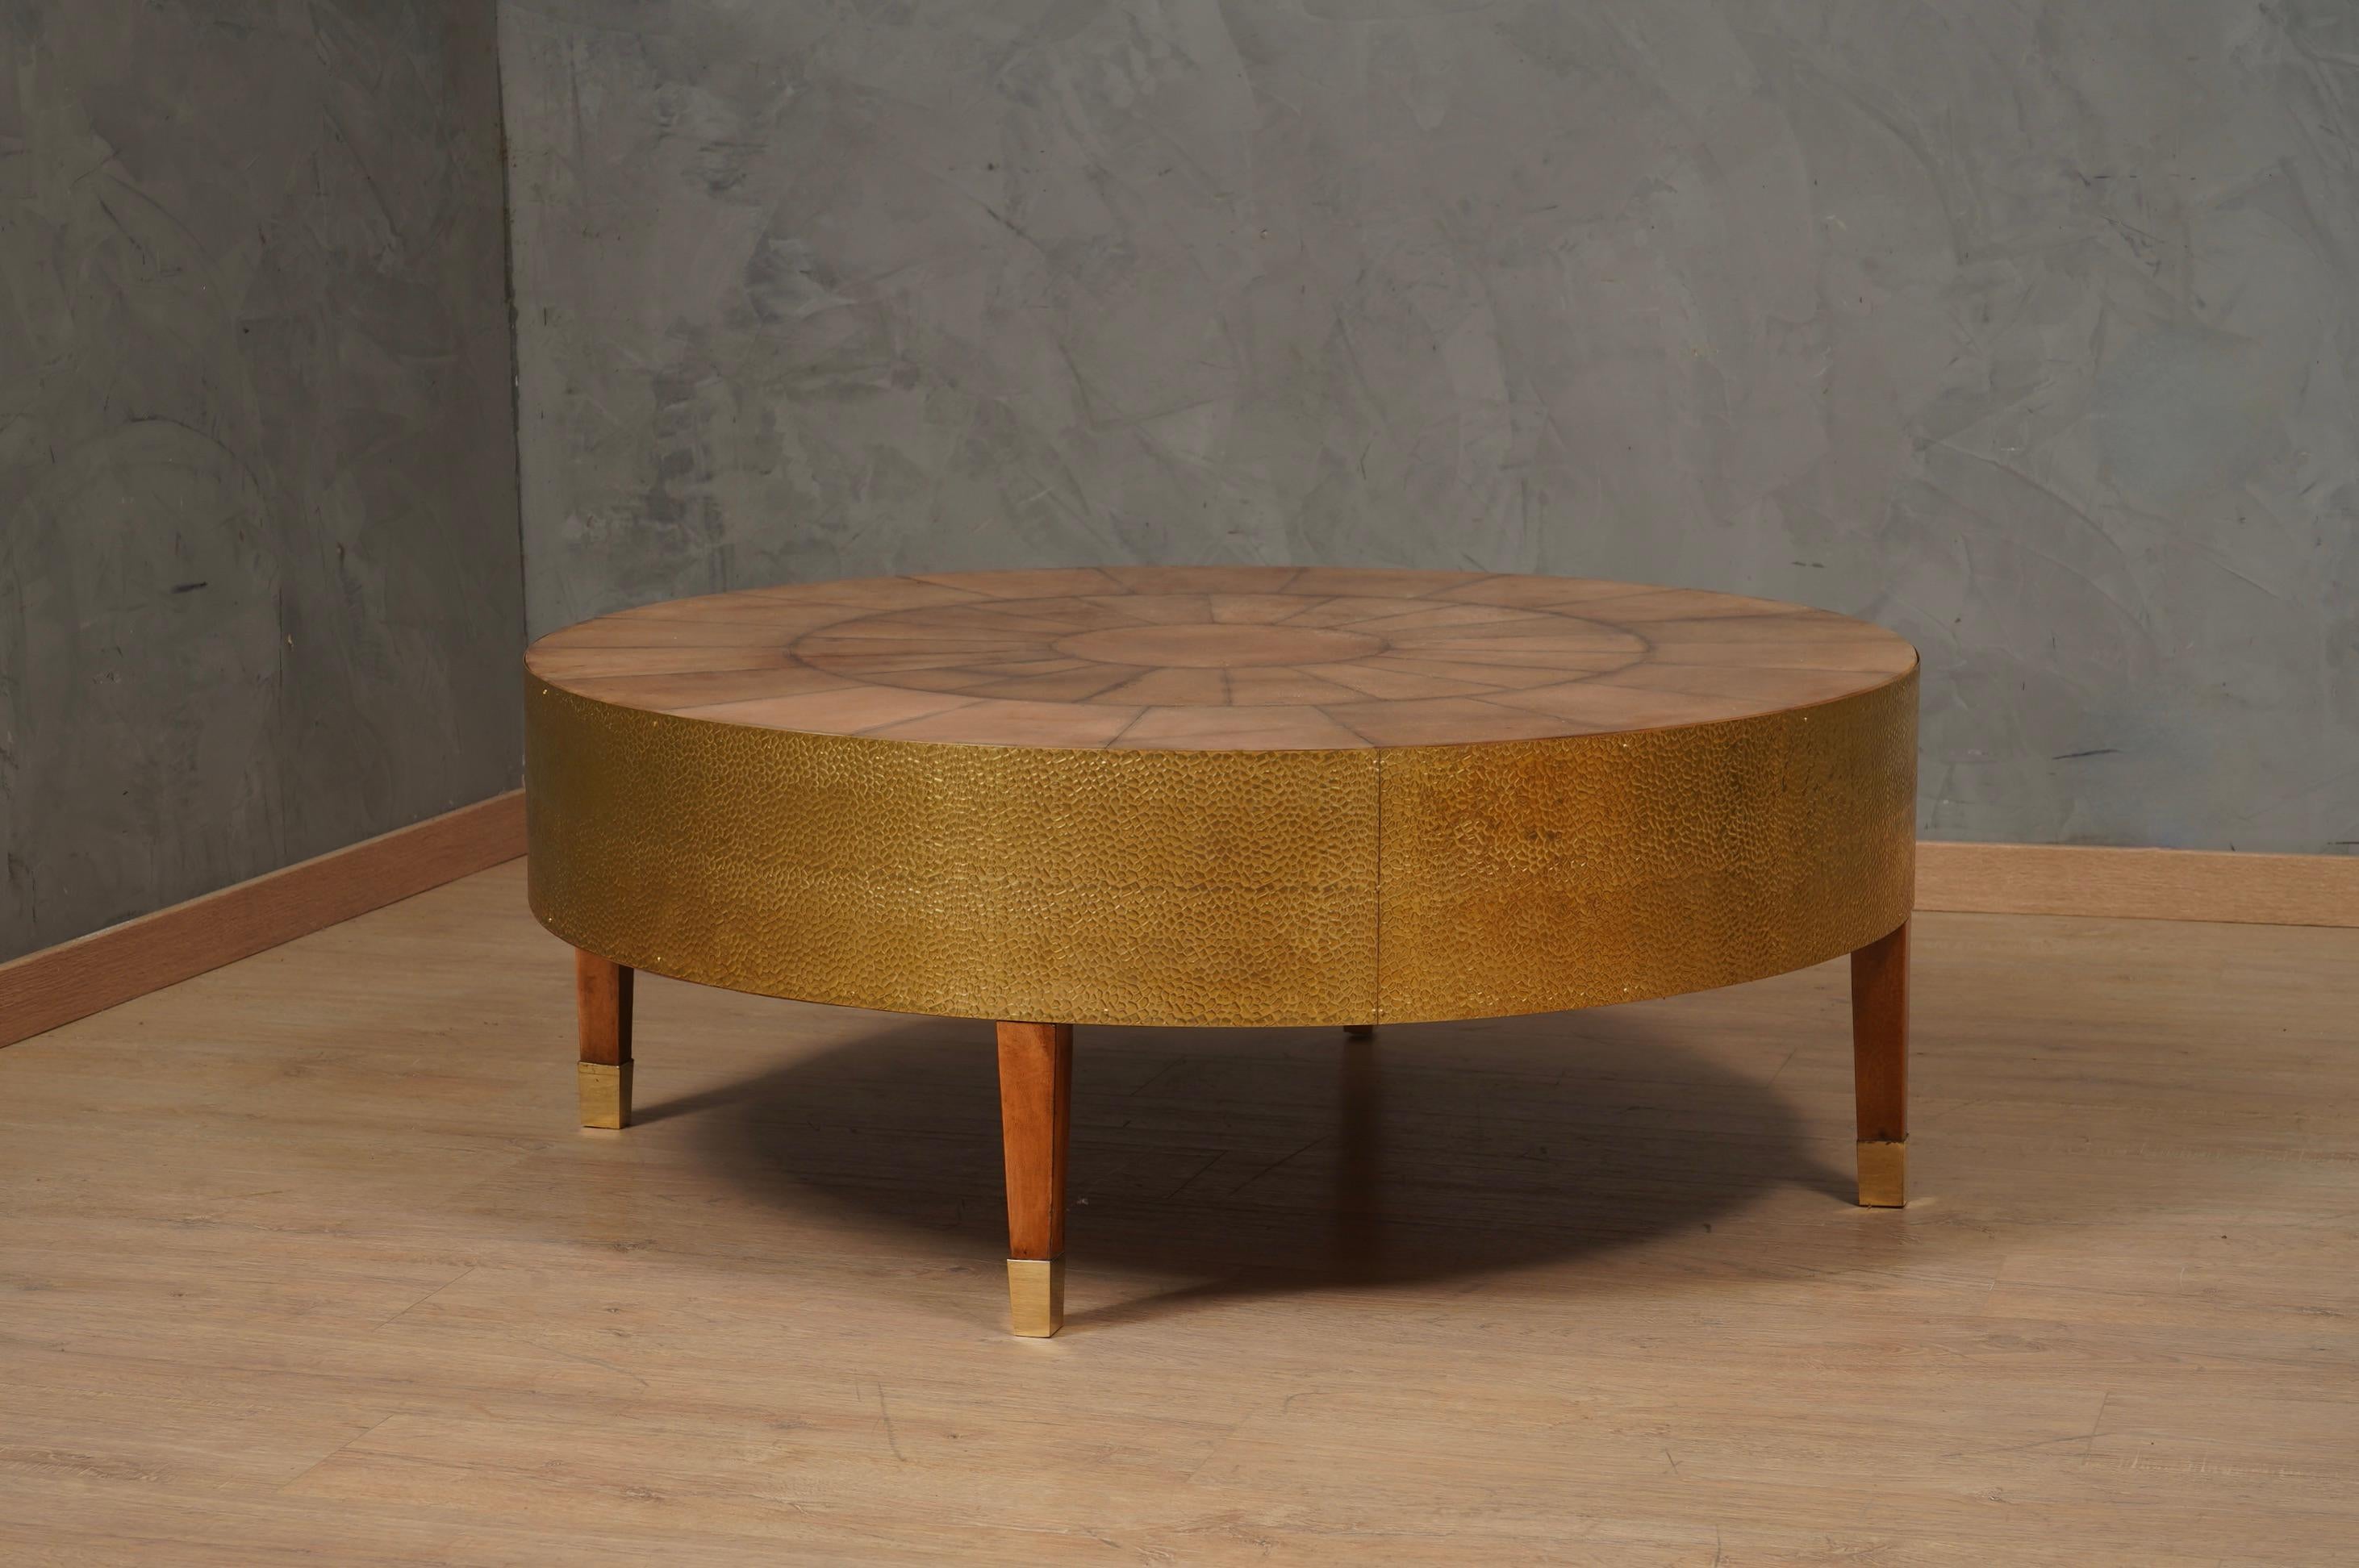 Charming sofa table in a beautiful patinated colour. This sofa table has a very luxurious appearance, also due to the use of uncommon materials, such as brass and parchment leather.

Top completely covered in parchment leather, positioned in